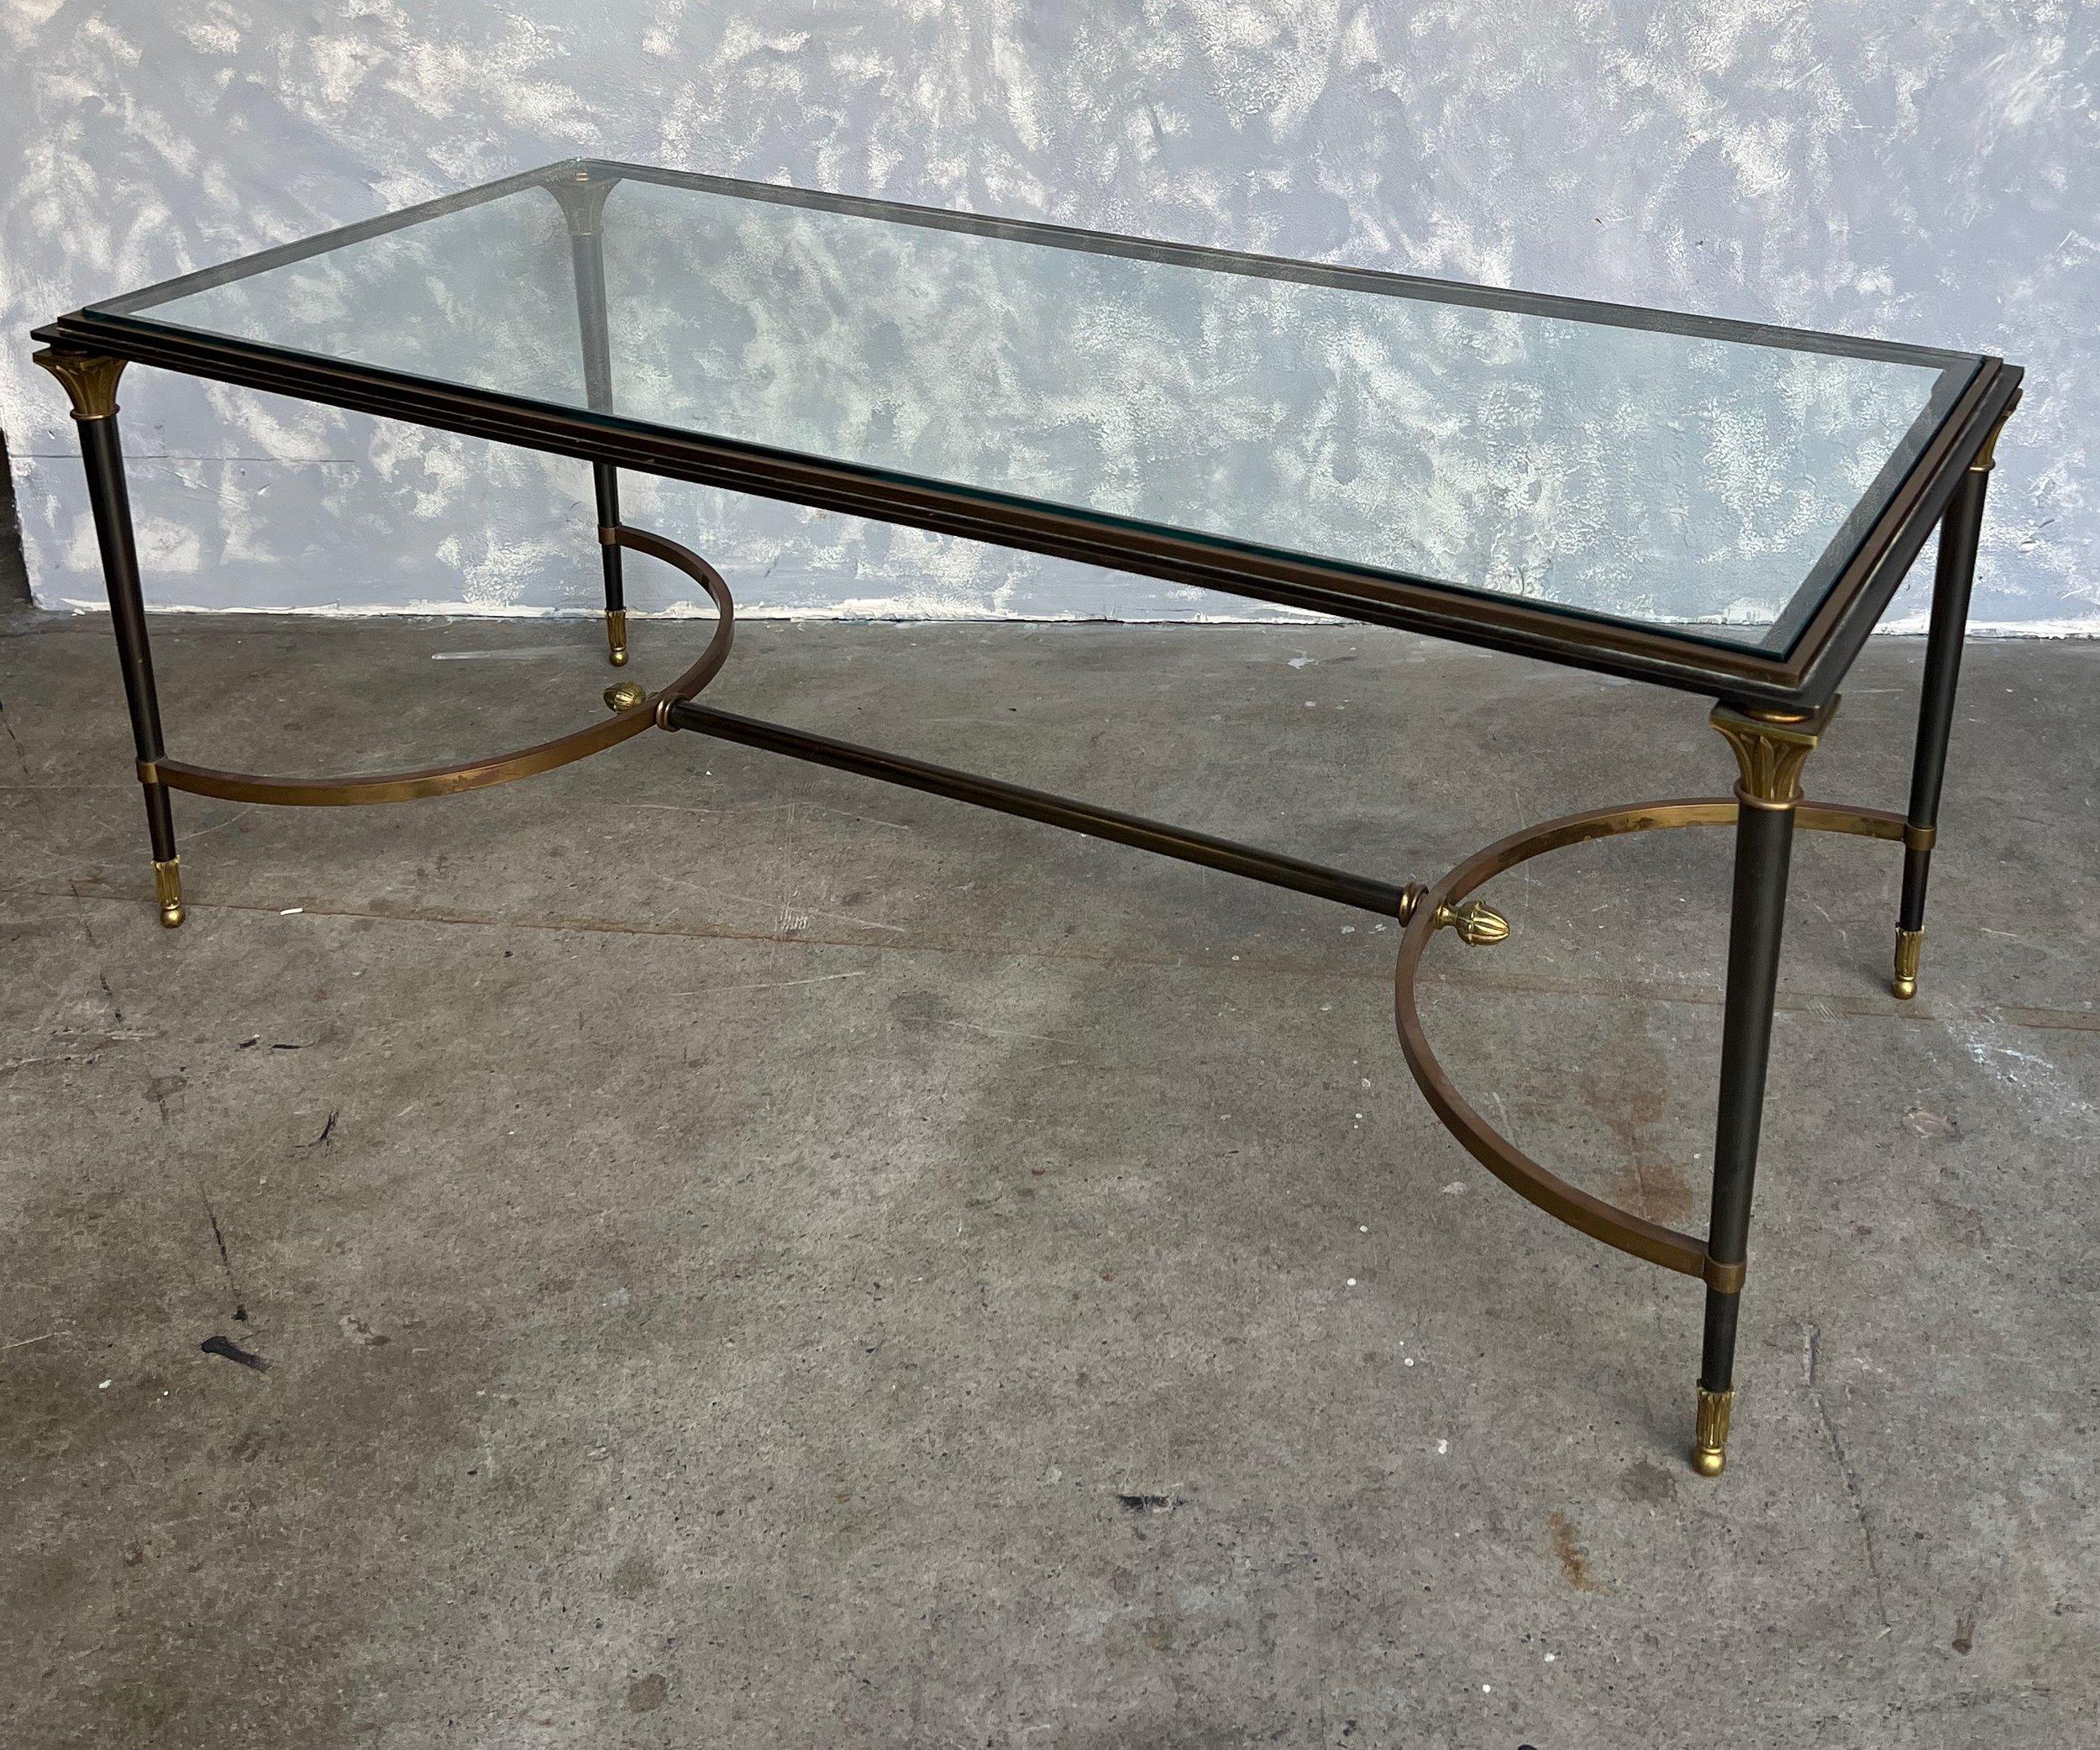 An elegant Italian 1960s Neoclassical style coffee table in the style of Jansen. The table is made of steel with classical gilt bronze decorative elements. The glass table top fits perfectly and the table is secured by a steel stretcher bar with